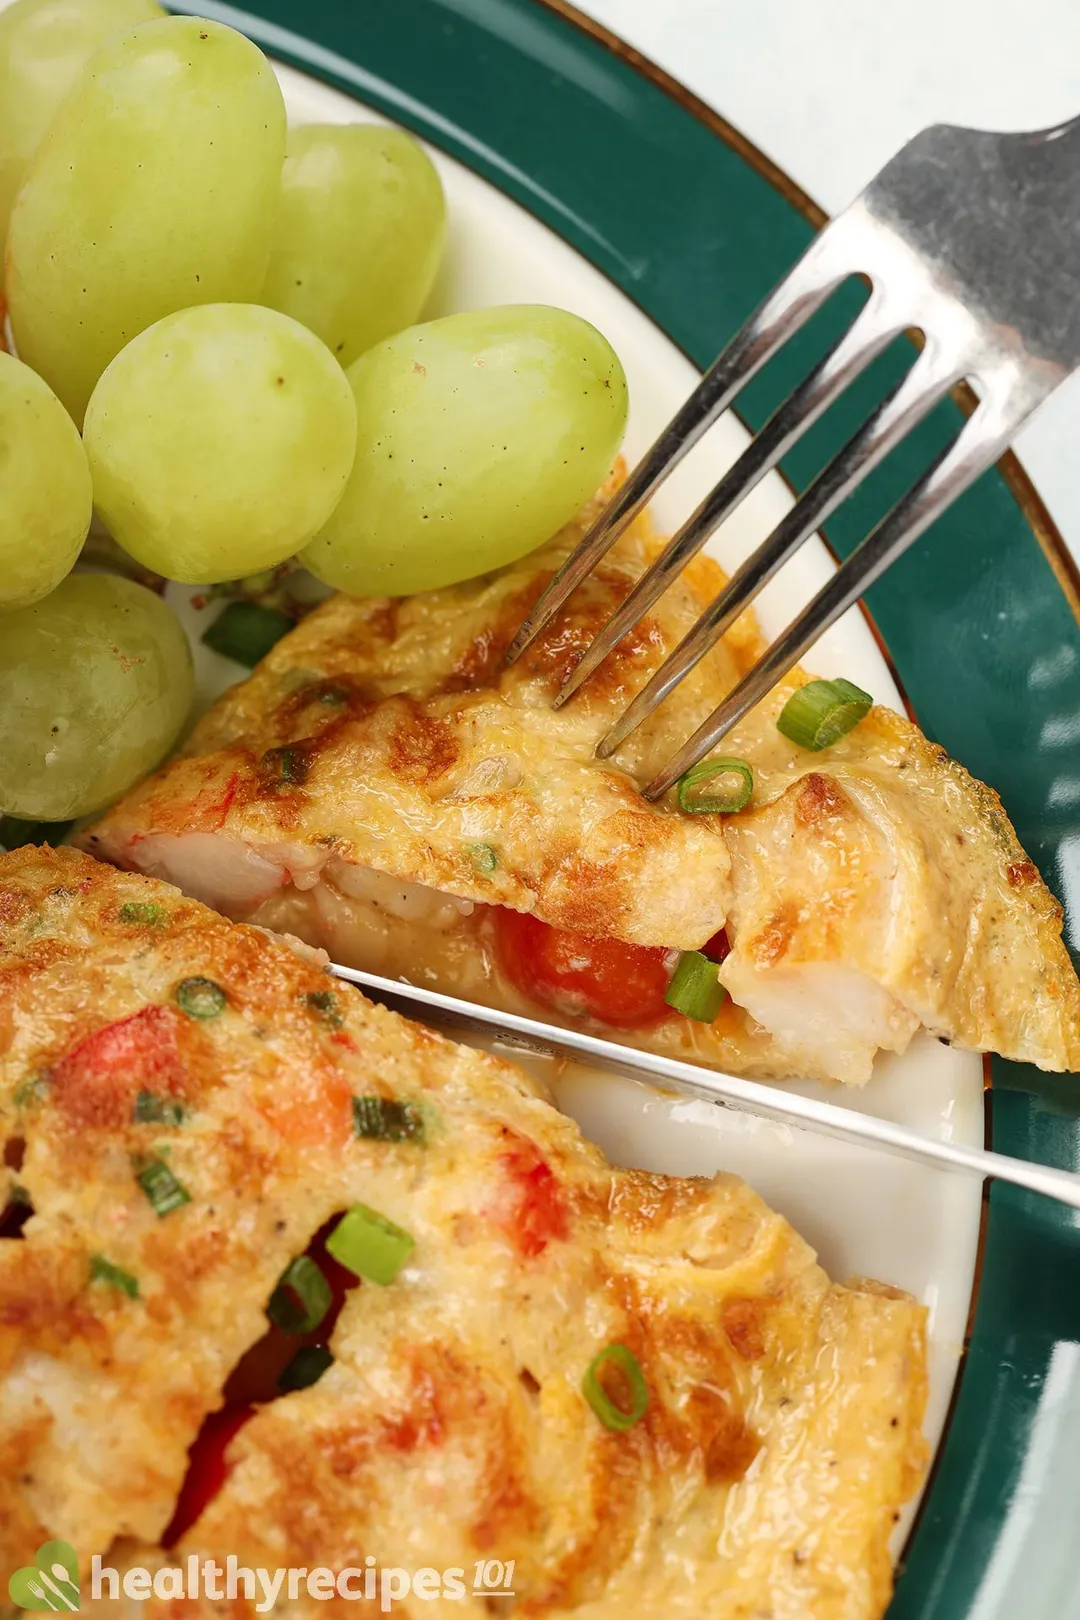 A fork piercing into a slice of shrimp omelette placed next to green grapes.